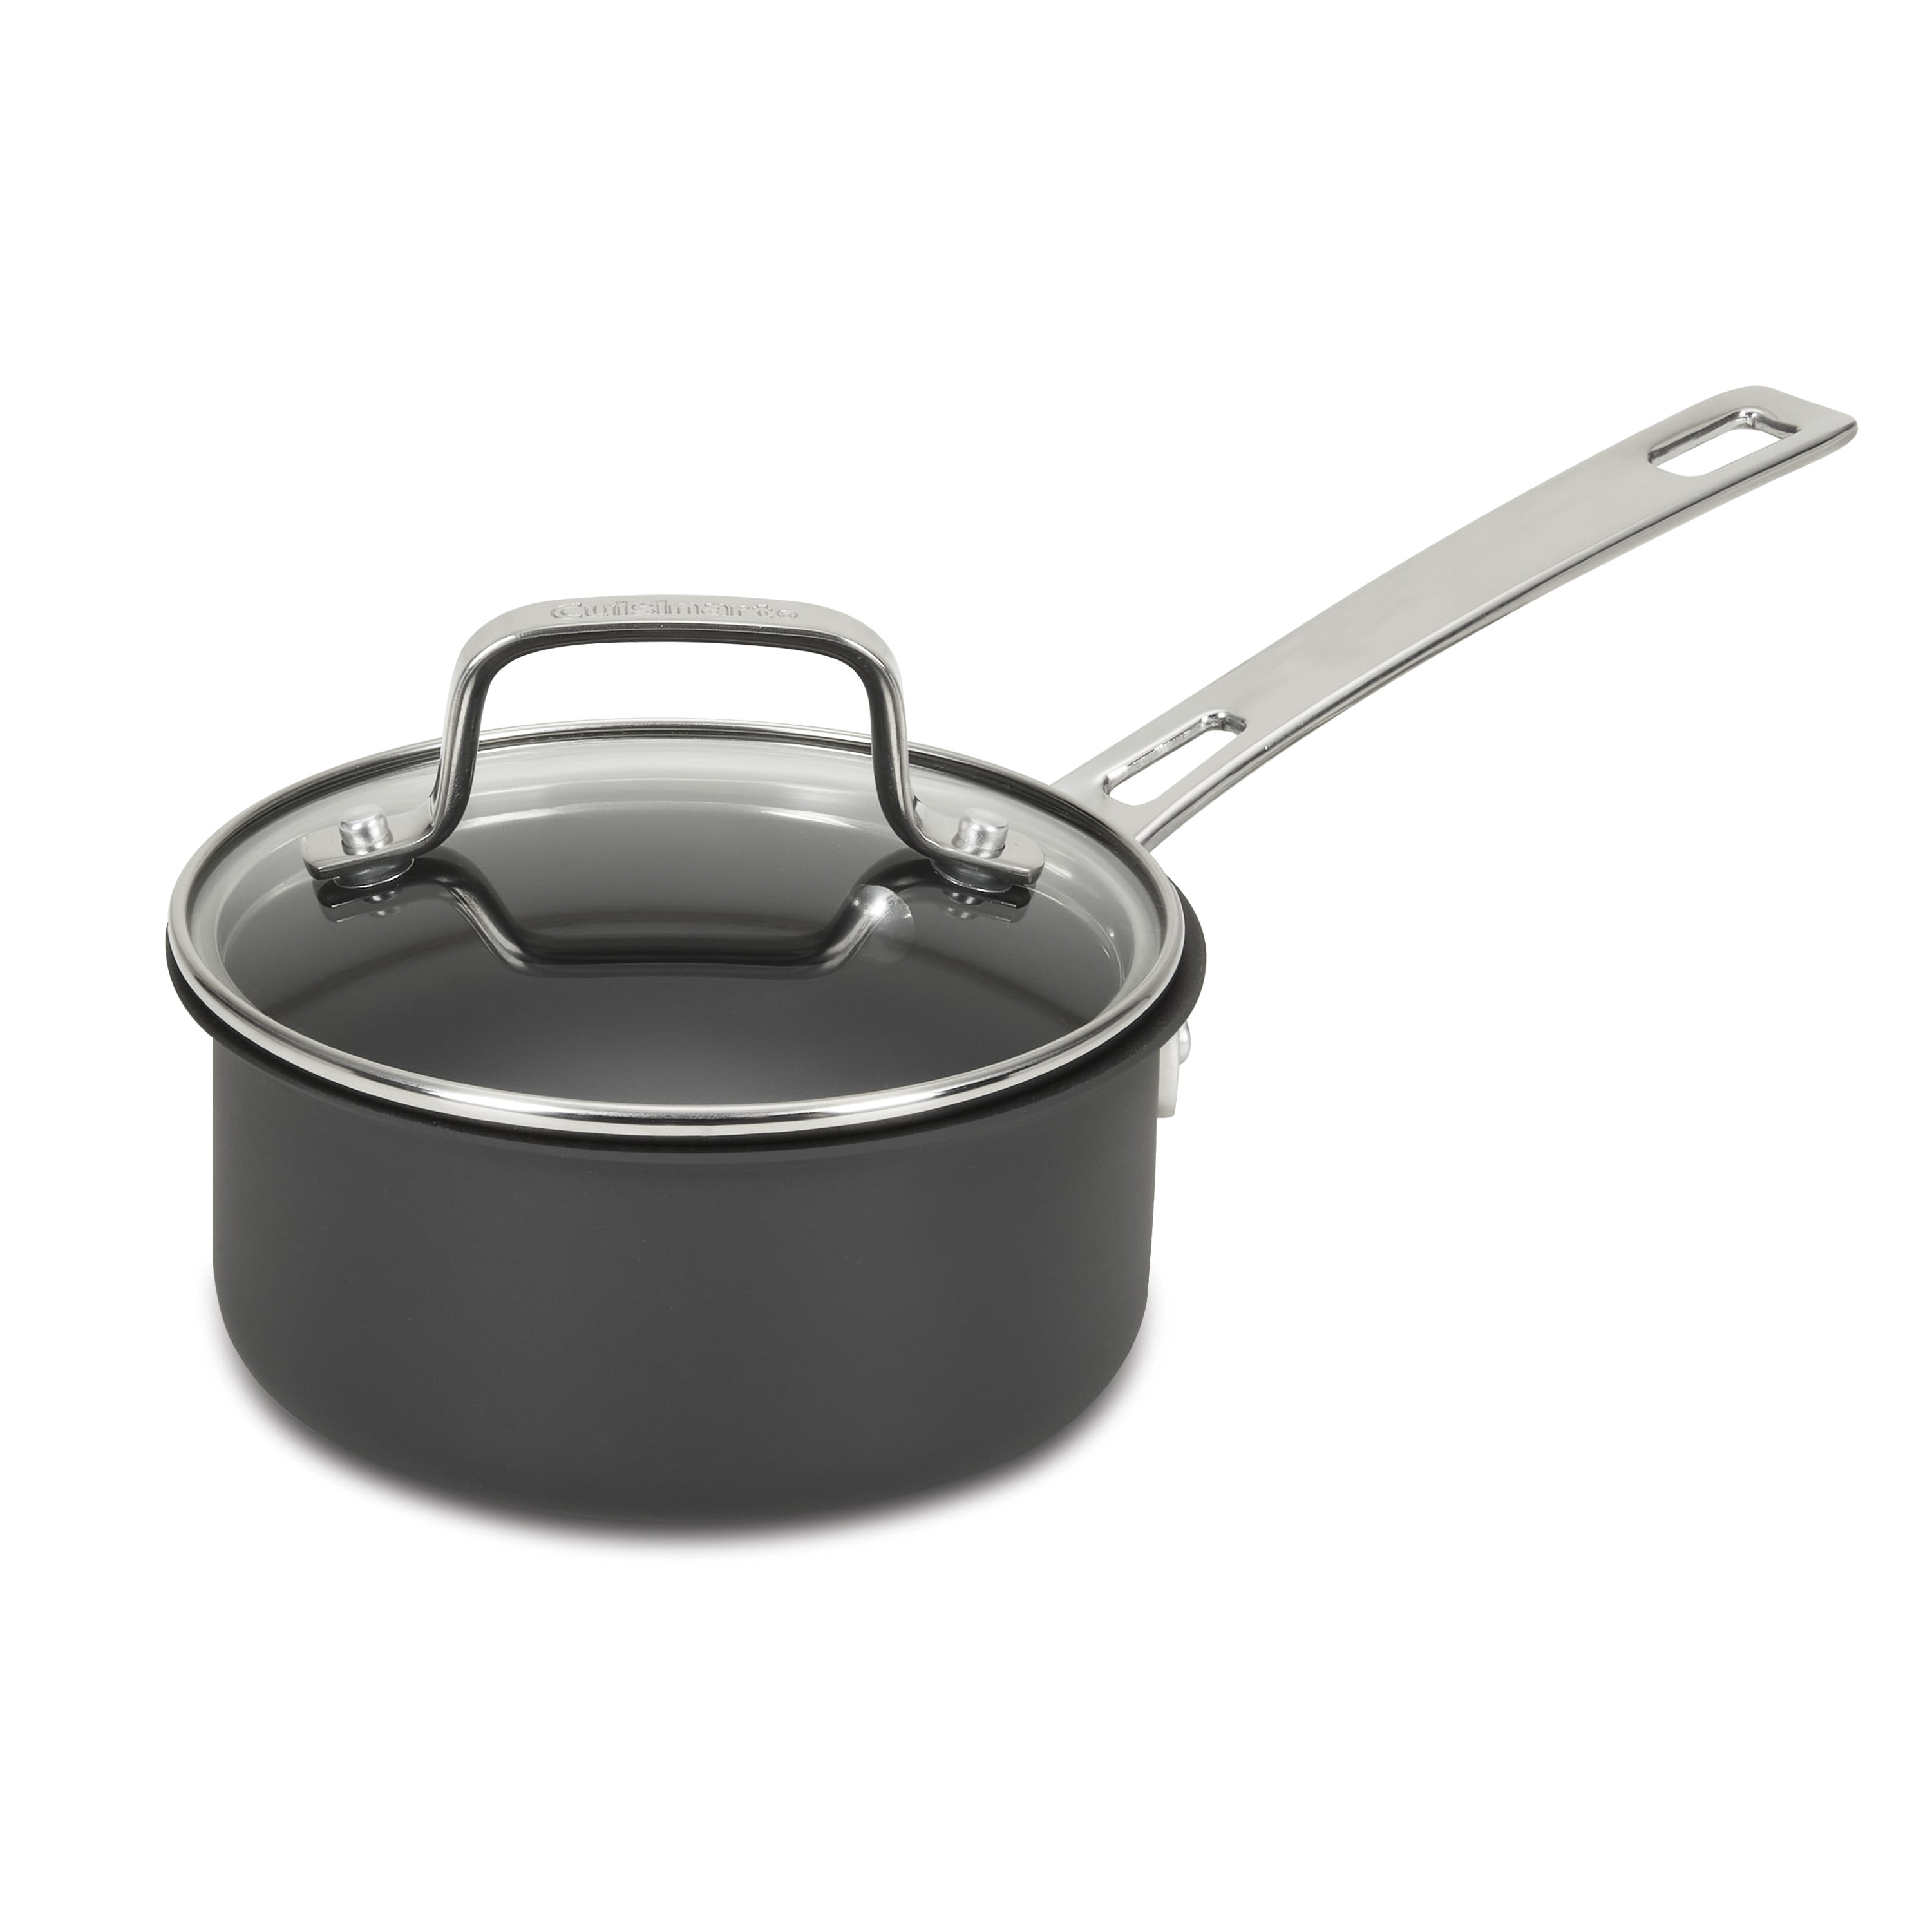 Cuisinart Advantage® Pro Premium Stainless-Steel Cookware 2.5 Qt. Saucepan  with Cover, 92195-18